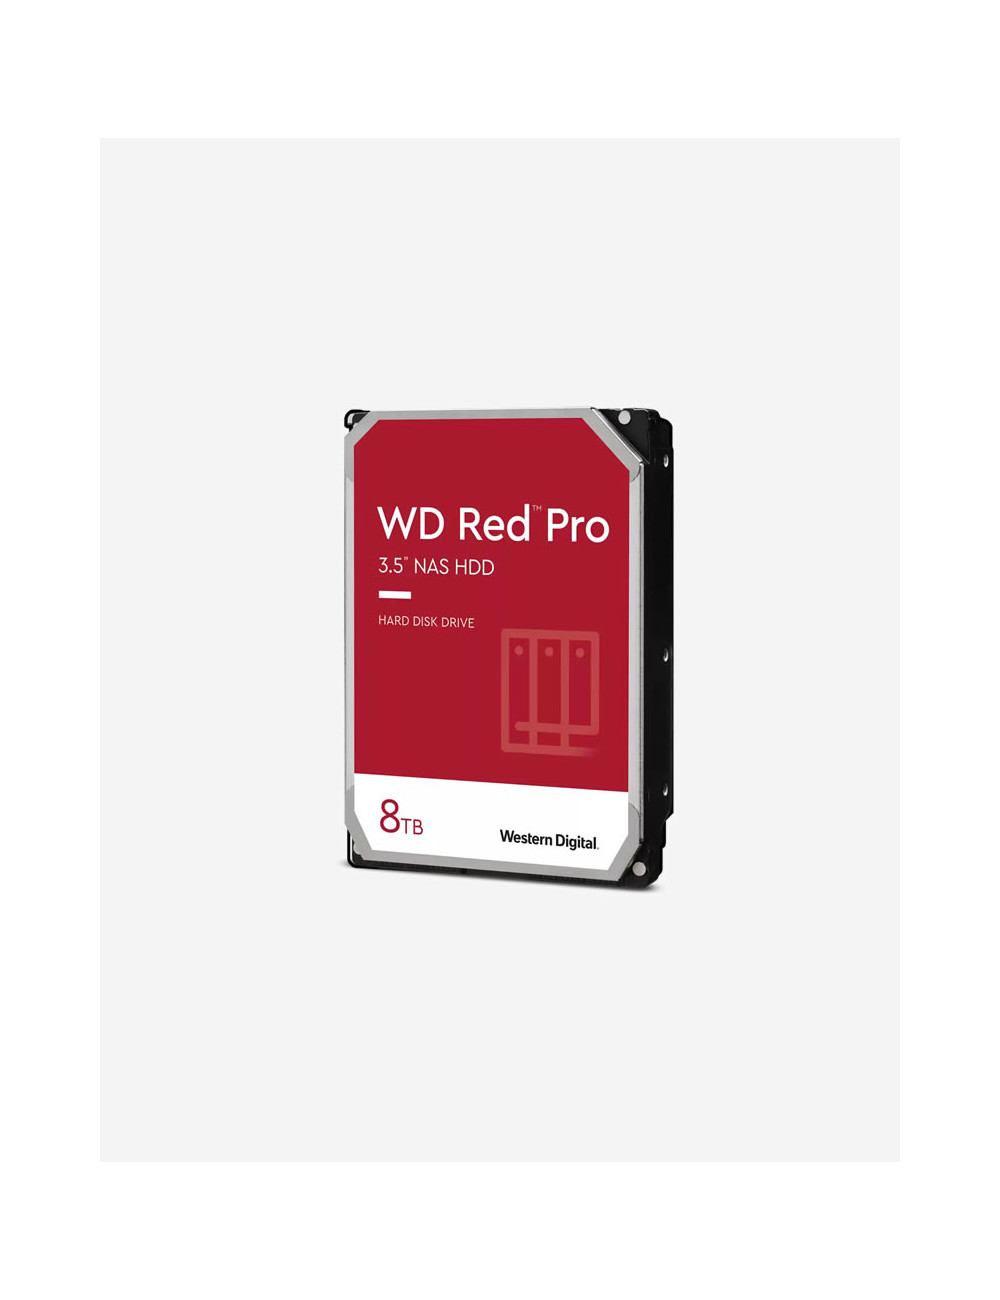 WD RED PRO 8TB 3.5" HDD Drive